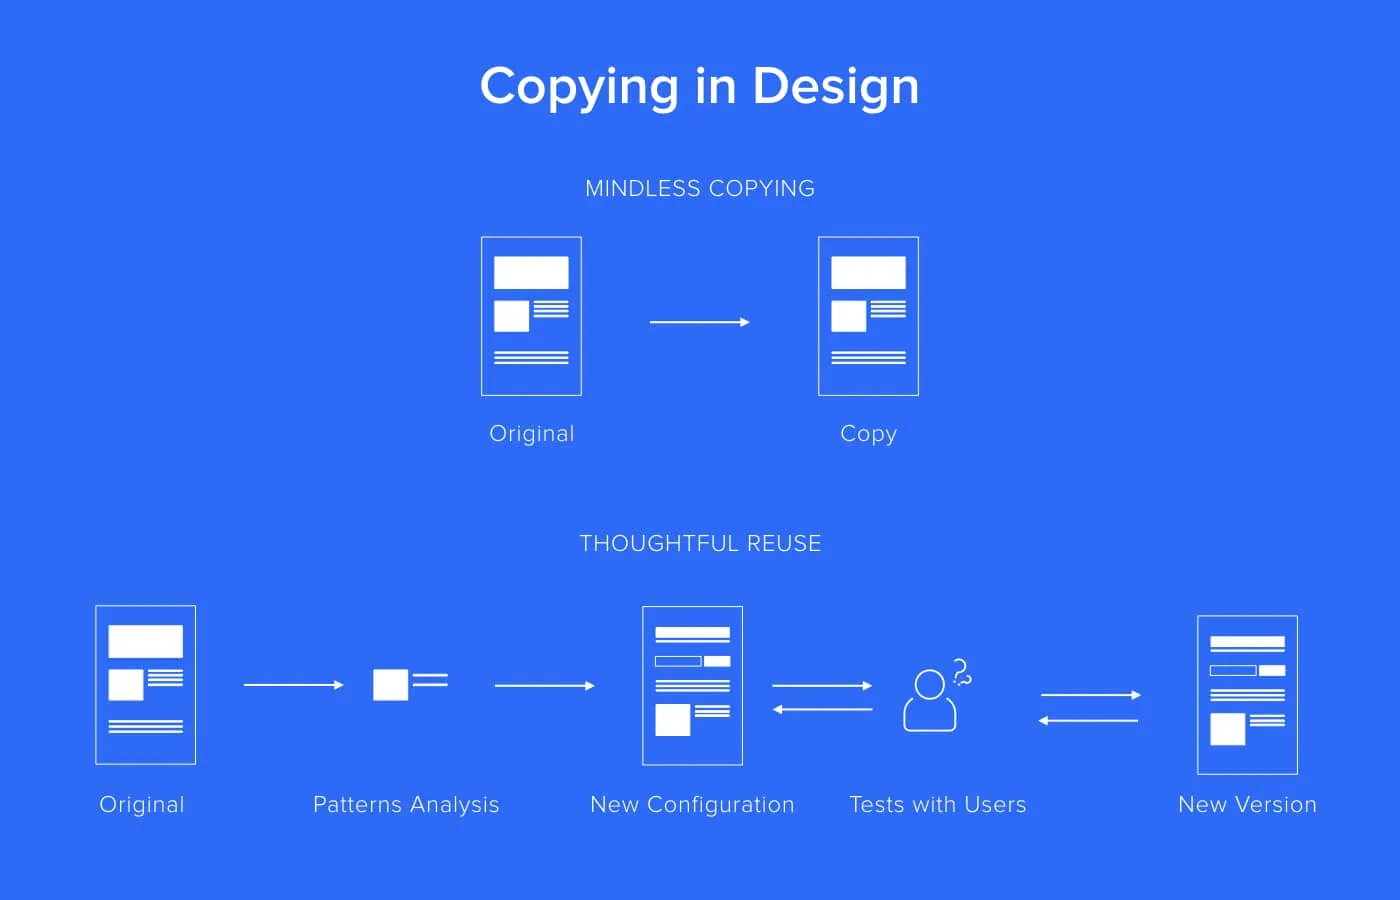 Two types of copying in design